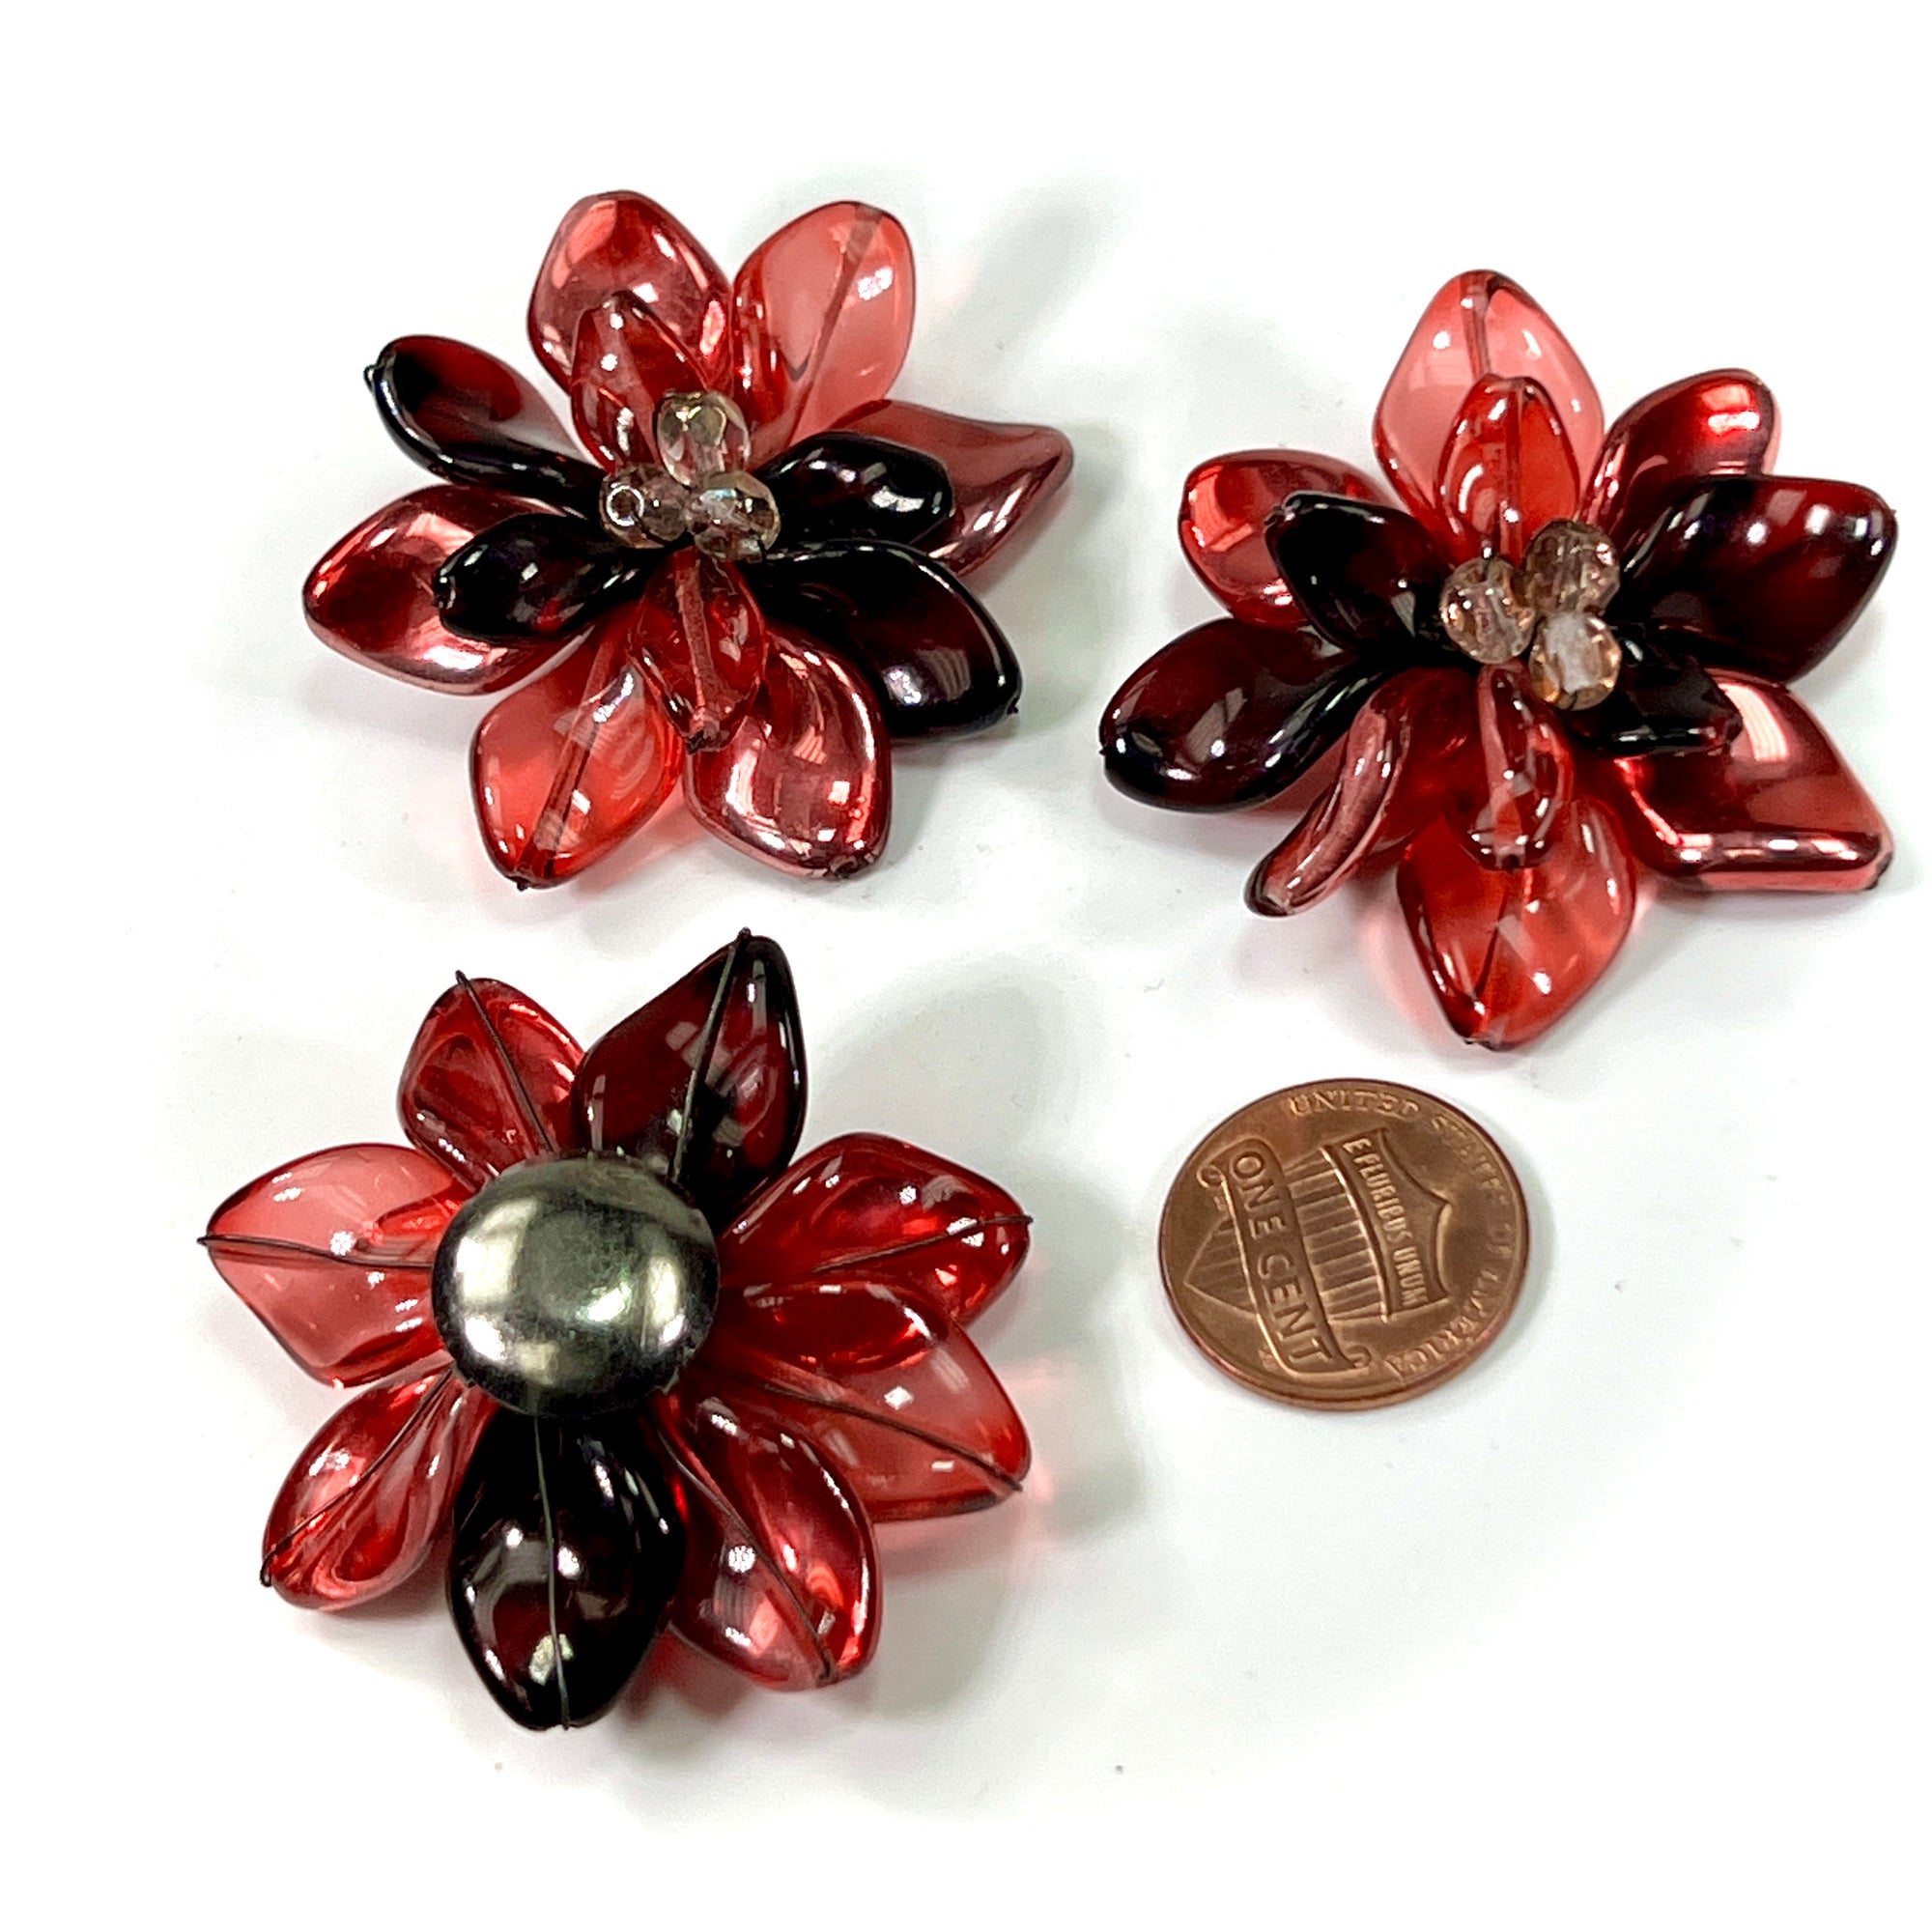 Czech Glass Beads 1.75 inch Flower Ornament Fuchsia and Red Color Combination 1 piece CA026